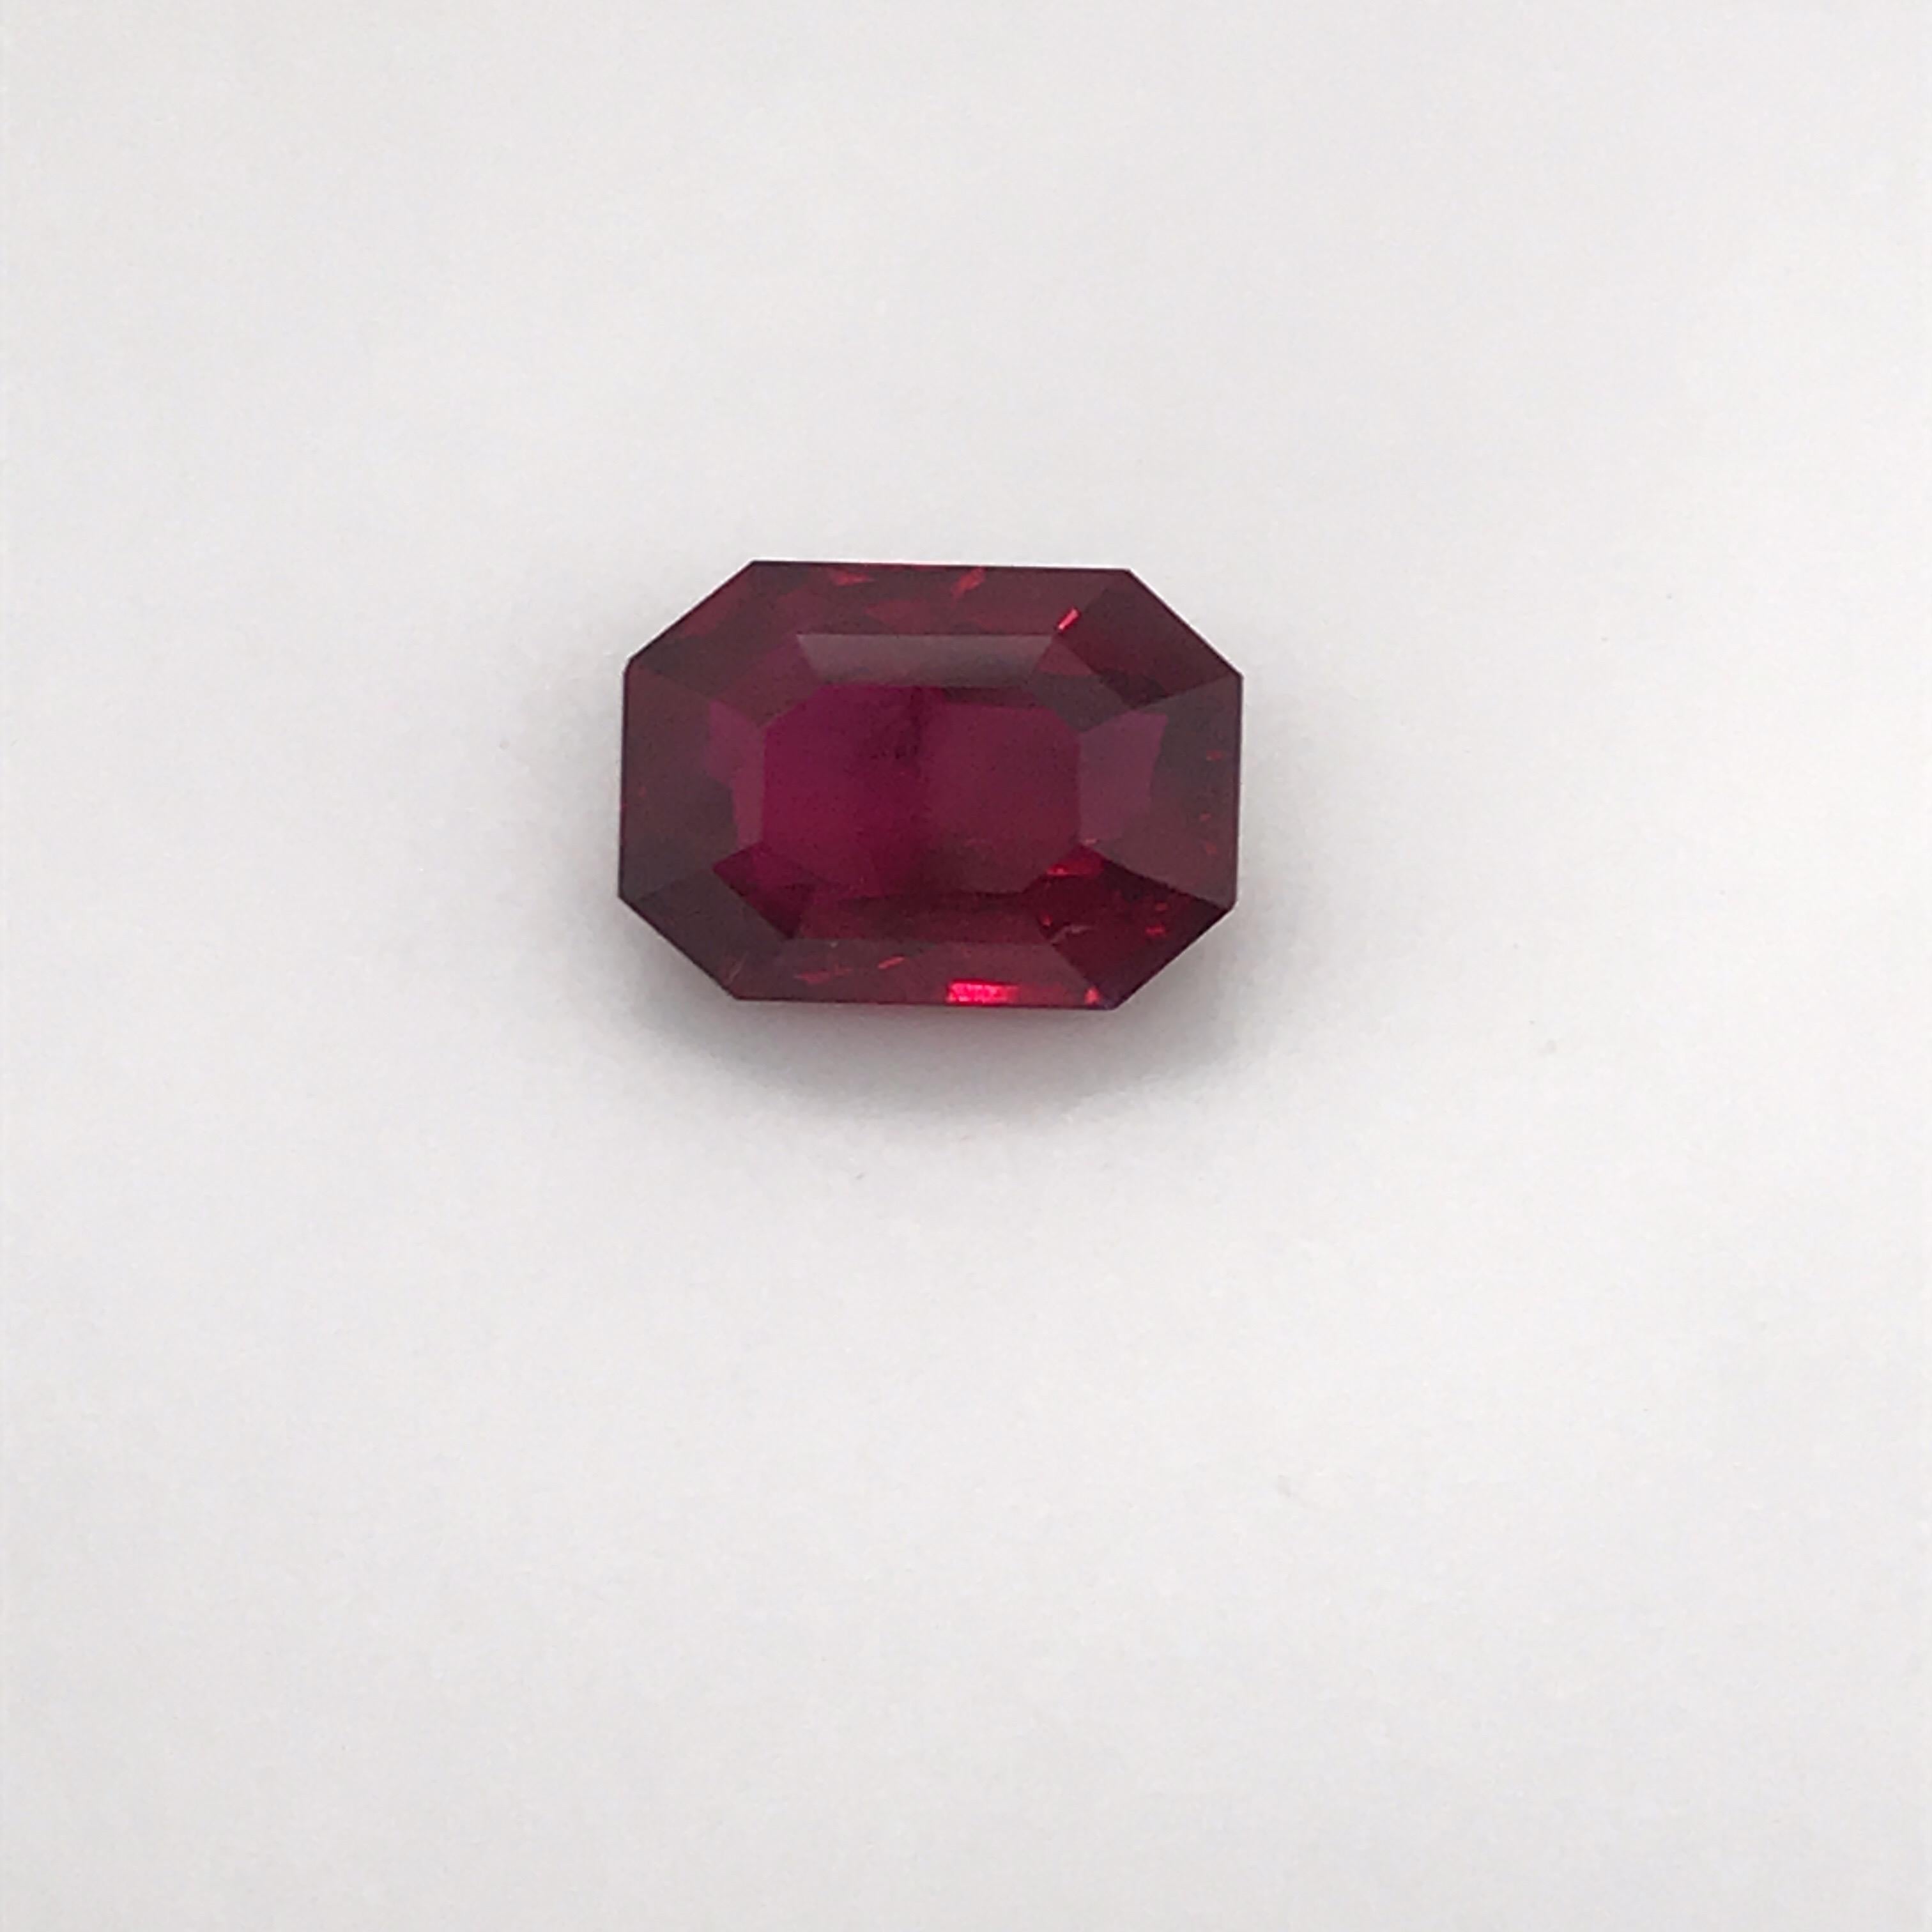 Gorgeous Natural Ruby with vivid red Pigeon Blood color weighing 5.38 carats. 
No Heat
Shape: Octagonal
Dimensions: 11.5 x 8.20 x 5.62 mm